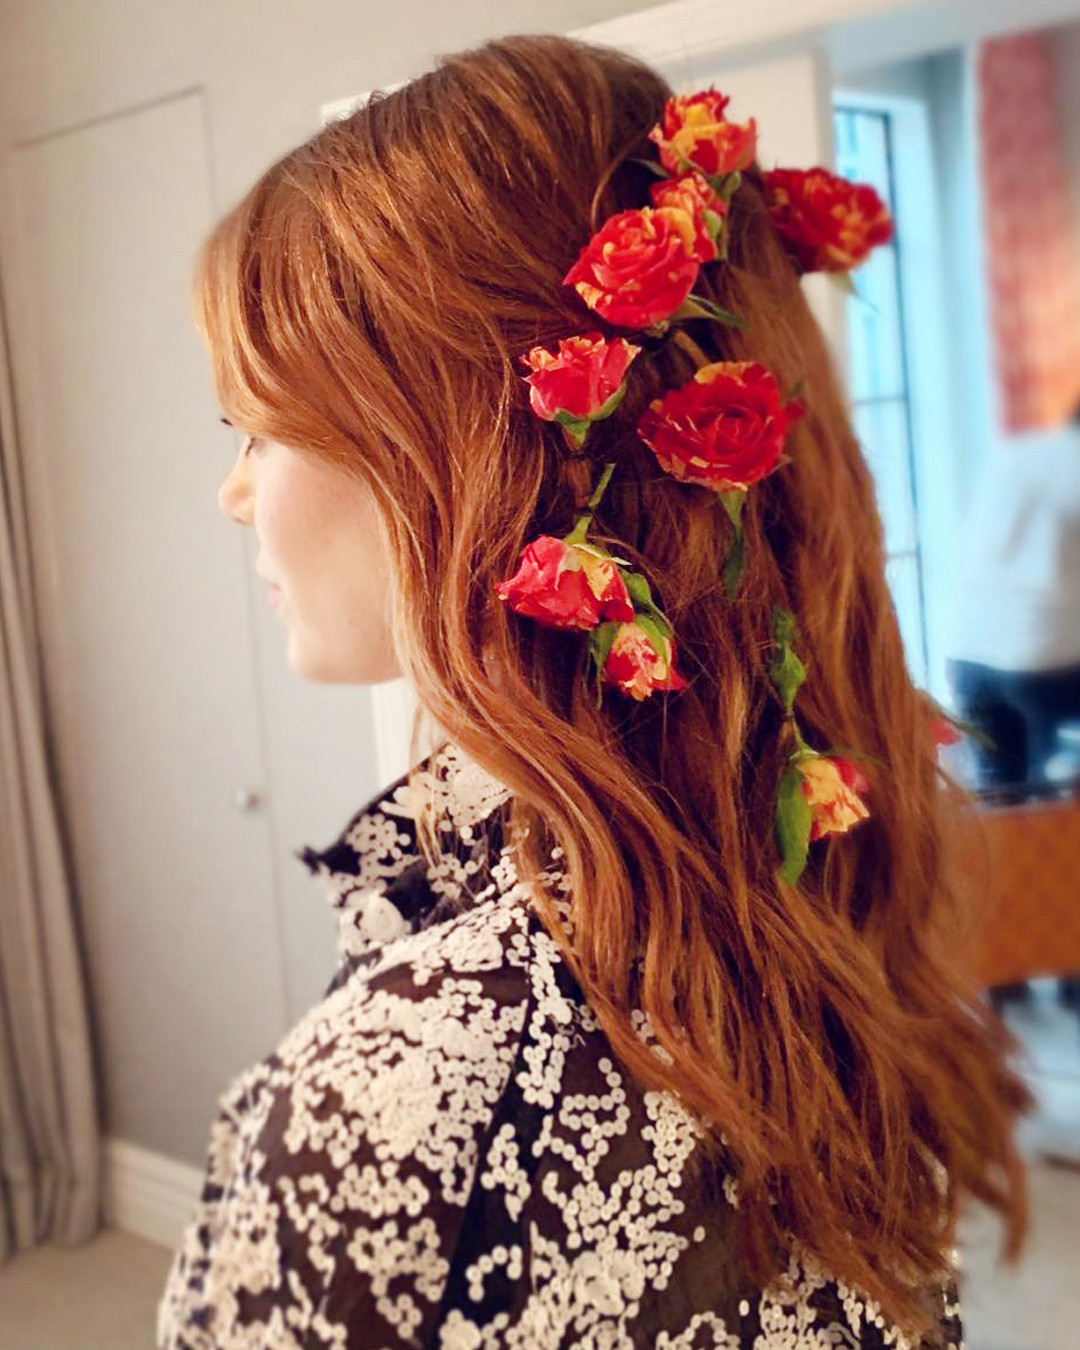 Emma Stones Hairstylist Shares 4 Weather-Proof Styling -4261